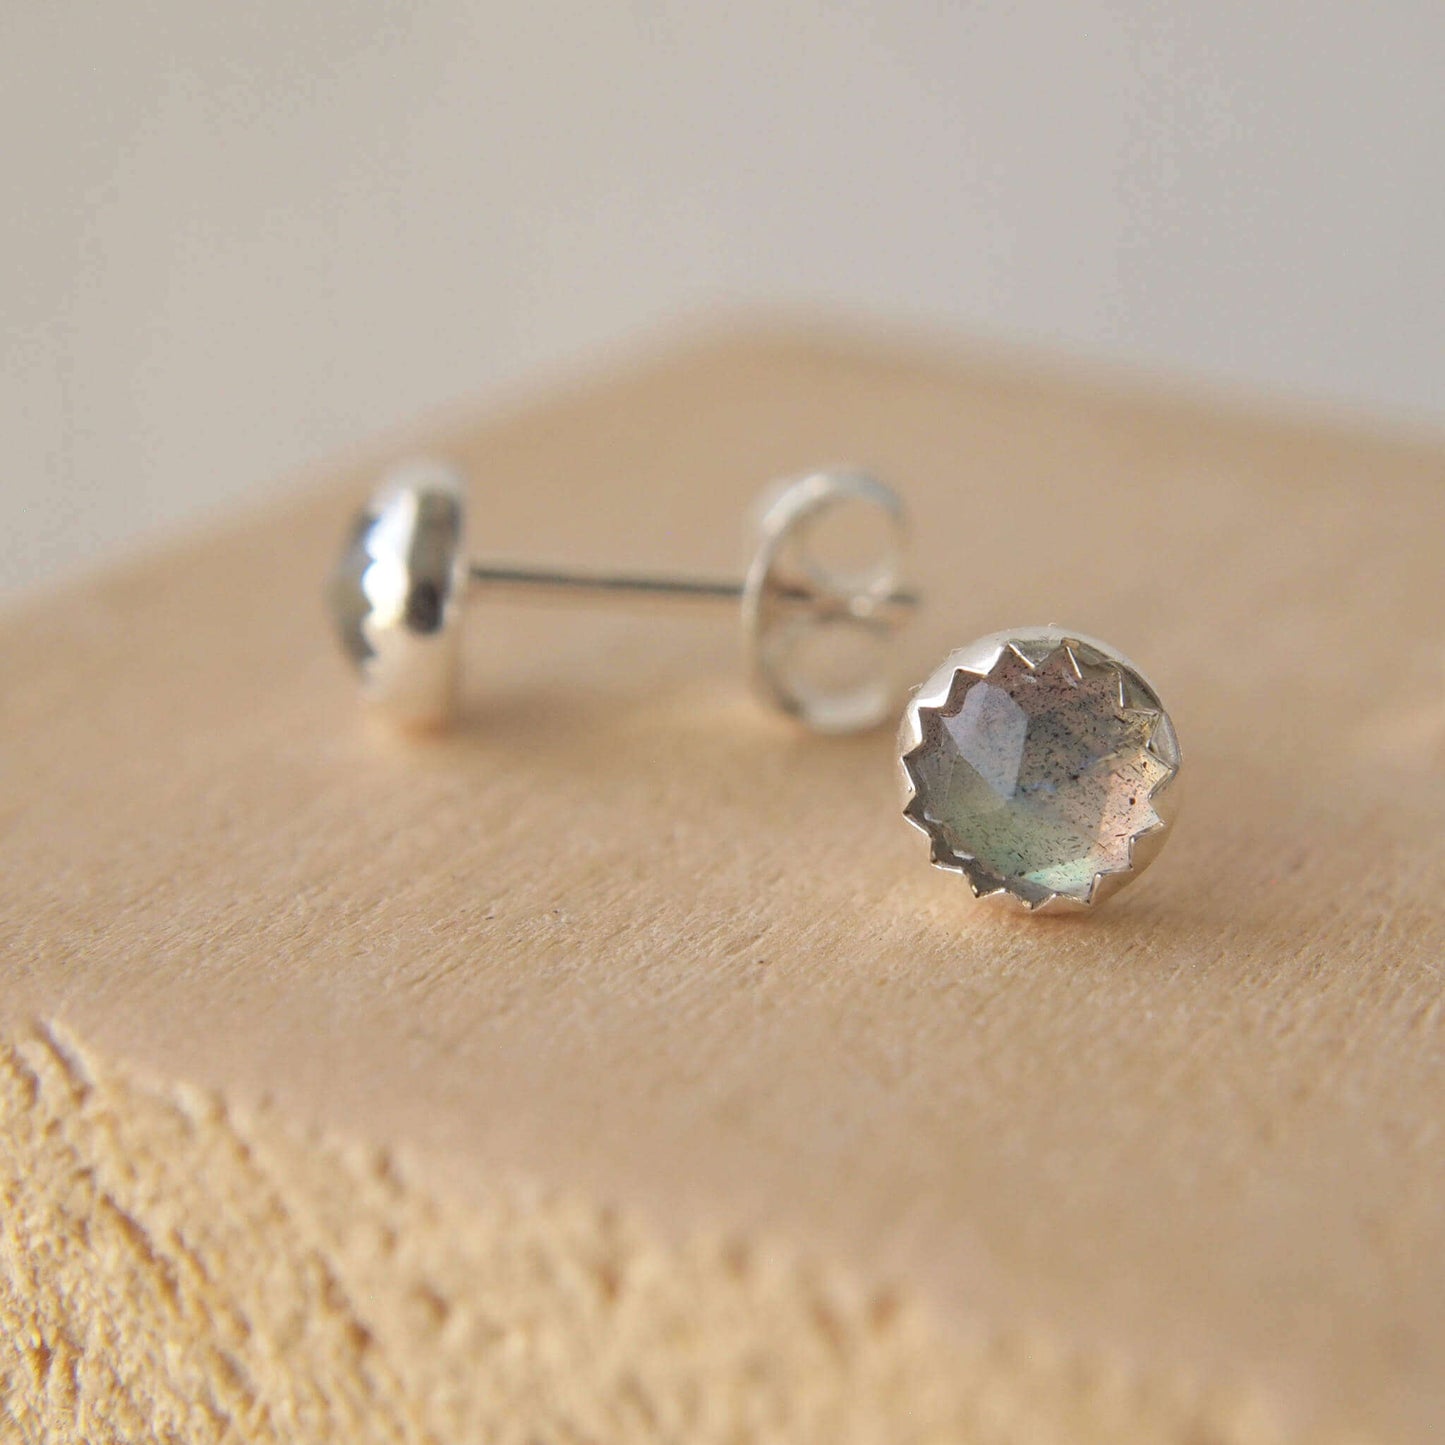 Sterling Silver and Labradorite gemstone modern simple stud earrings. measuring 5mm in size these have 5mm facet cut labradorite gemstones set into simple Sterling silver surrounds. handcrafted by maram jewellery in Scotland UK